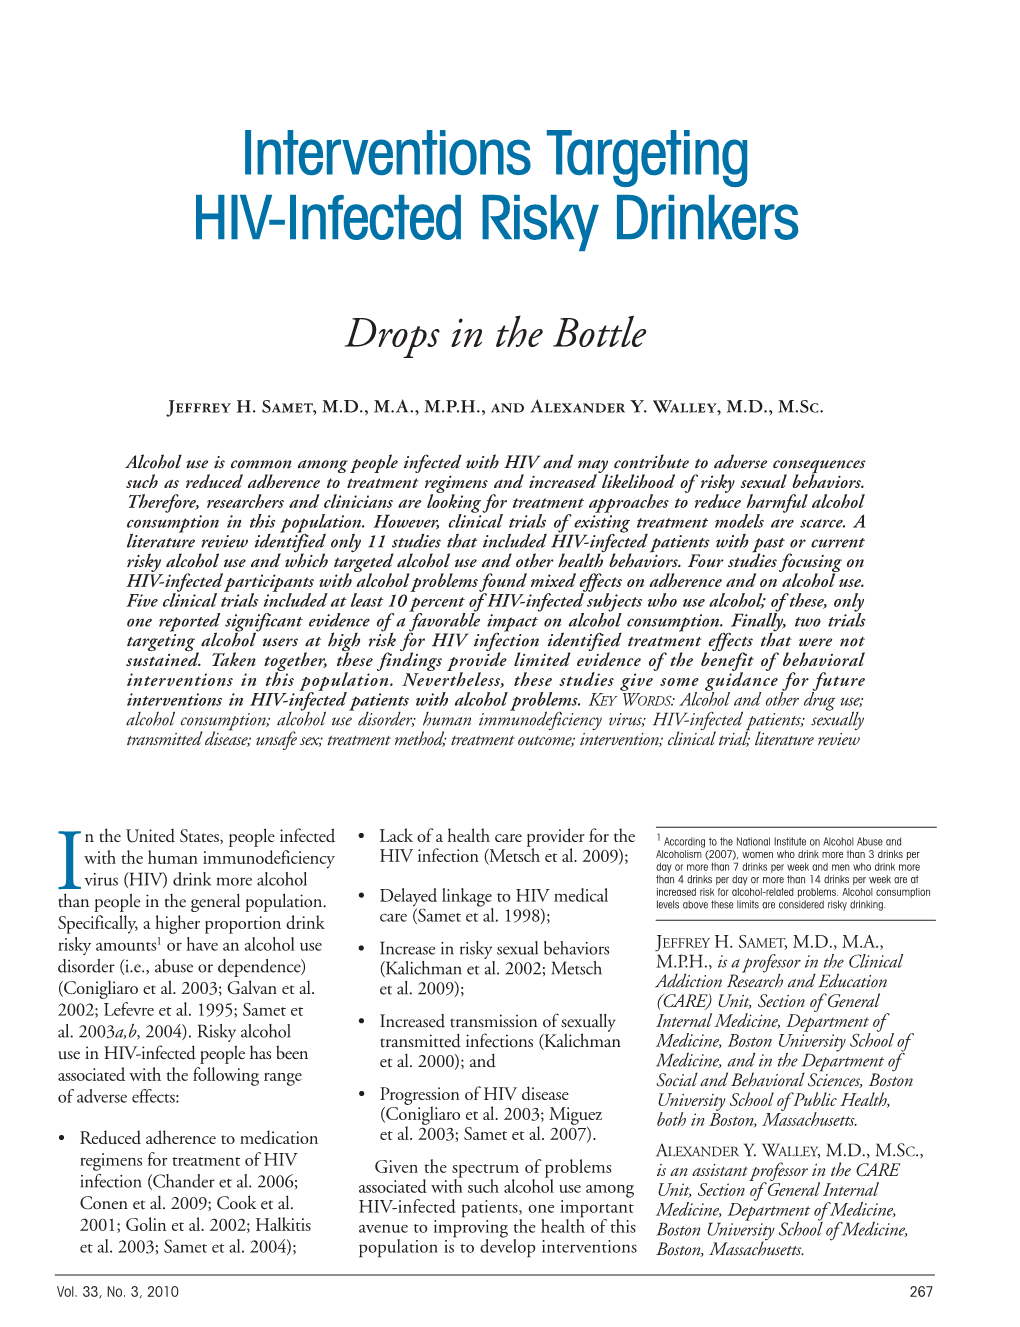 Interventions Targeting HIV-Infected Risky Drinkers